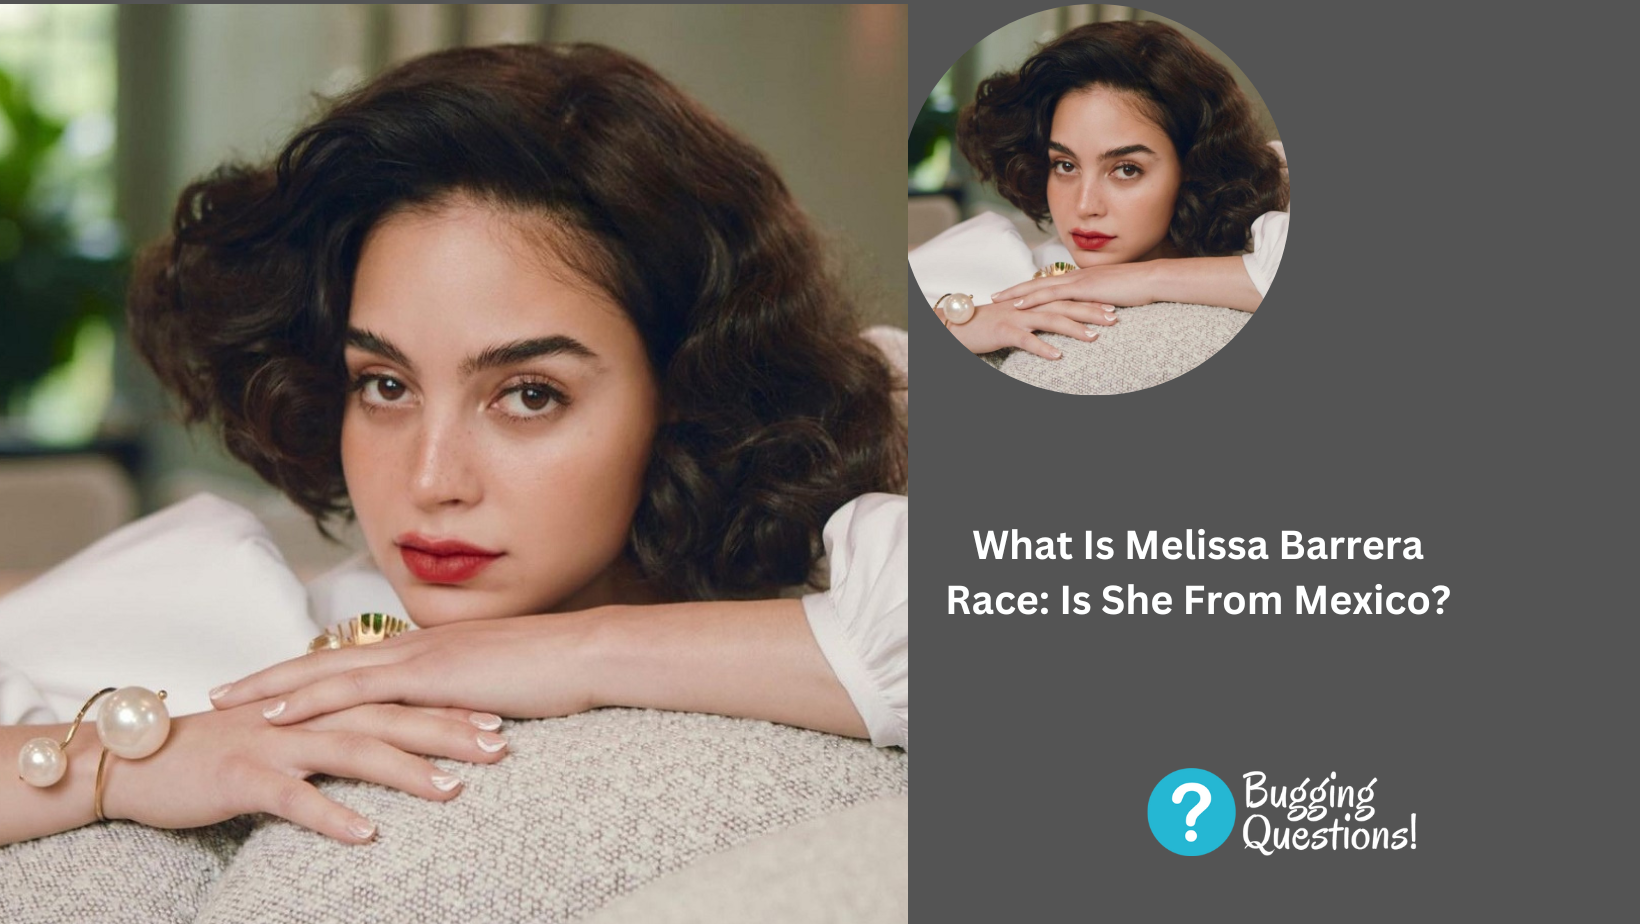 What Is Melissa Barrera Race: Is She From Mexico?